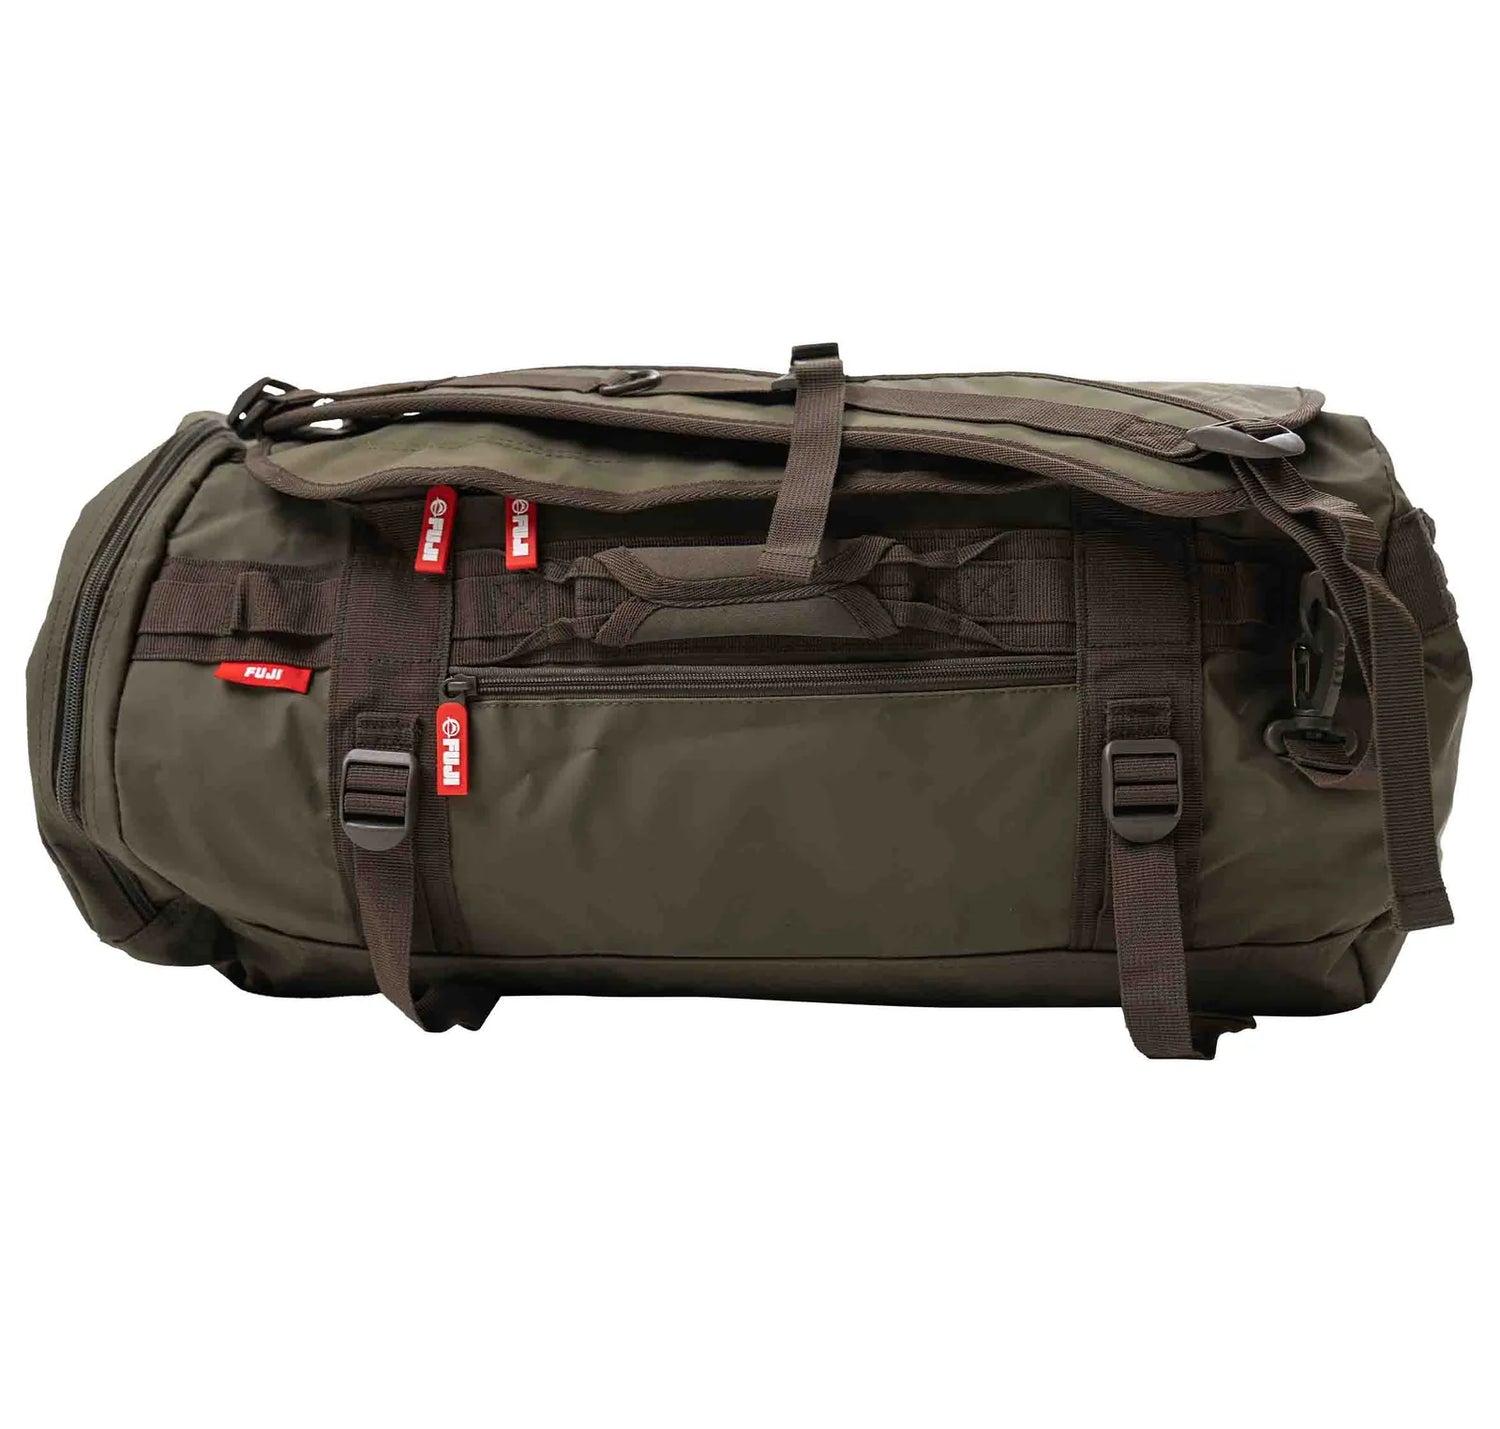 Comp Convertible Backpack Duffle by Fuji (5 Color Choices)